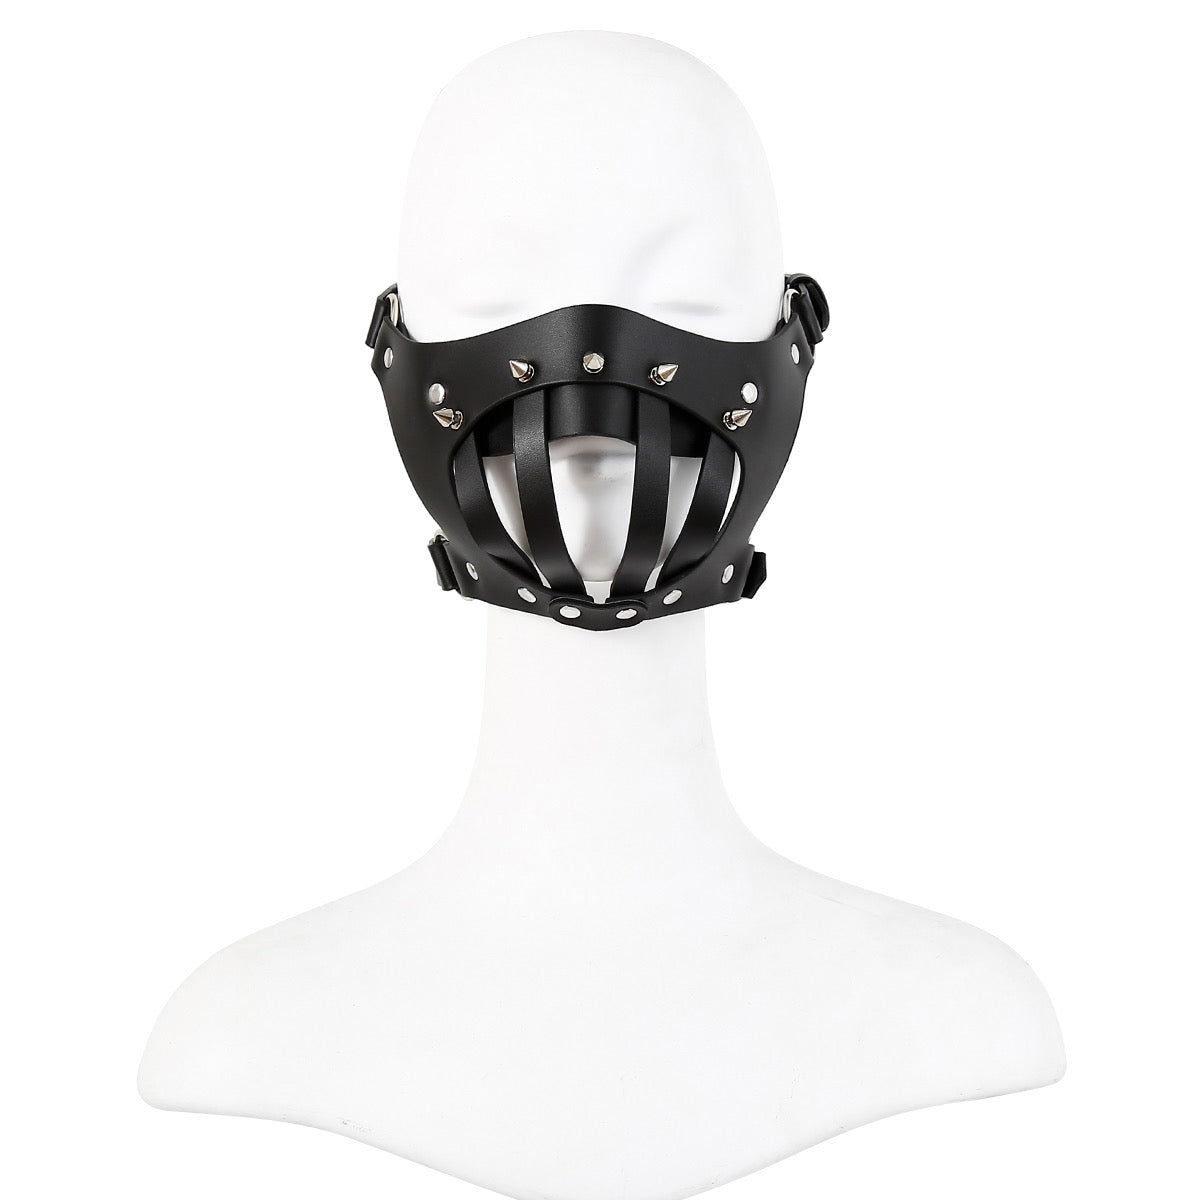 MEN’S LEATHER COSPLAY MASKS